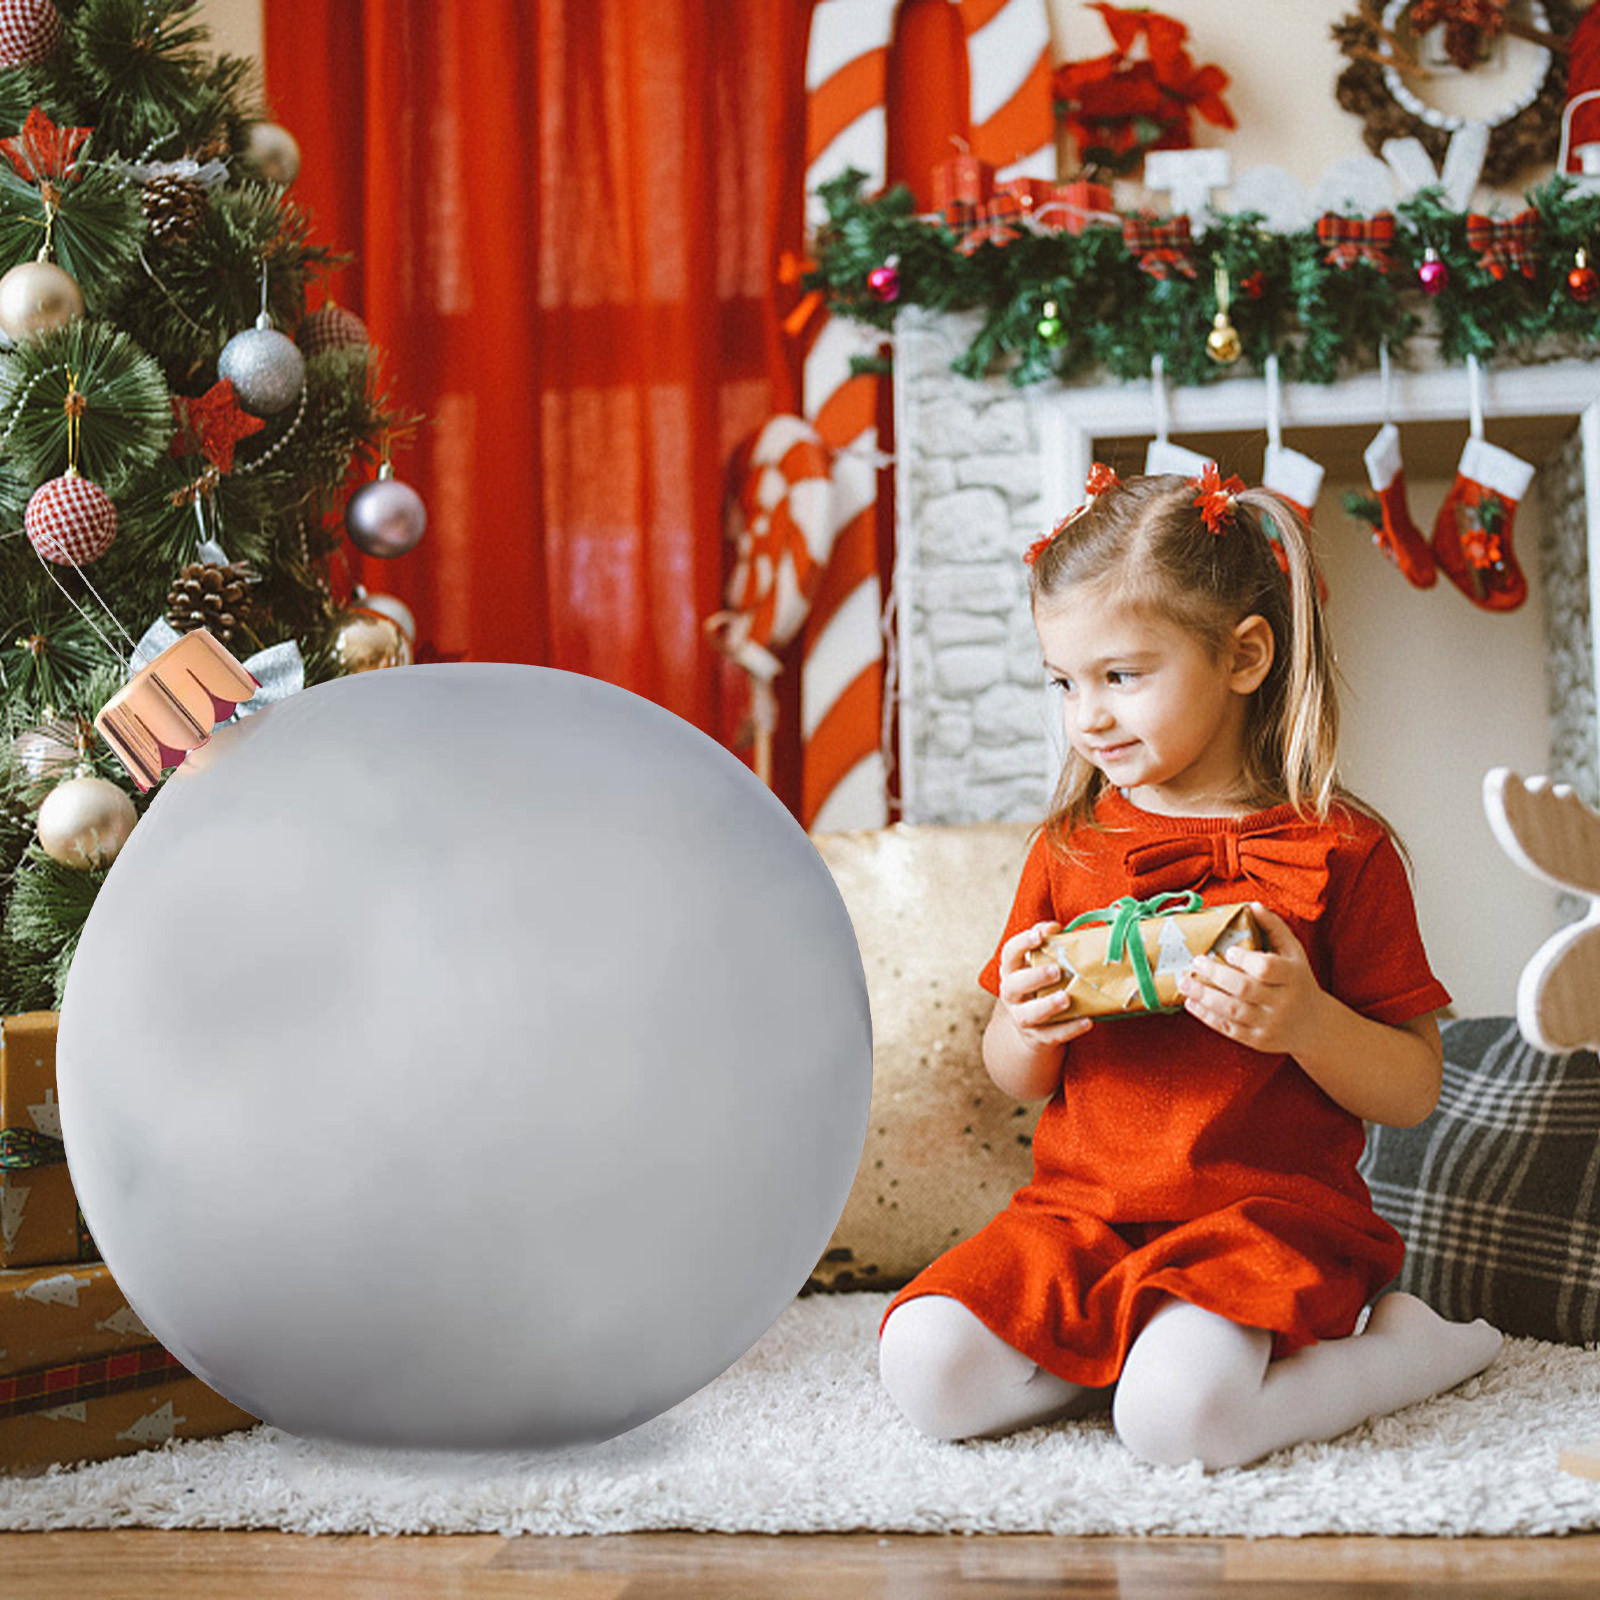 Usmixi Under 5 Dollars Inflatable Christmas Ornaments Oversized Christmas Ball Ornaments for Xmas Yard Decorations Indoor Outdoor, Men's, Size: One